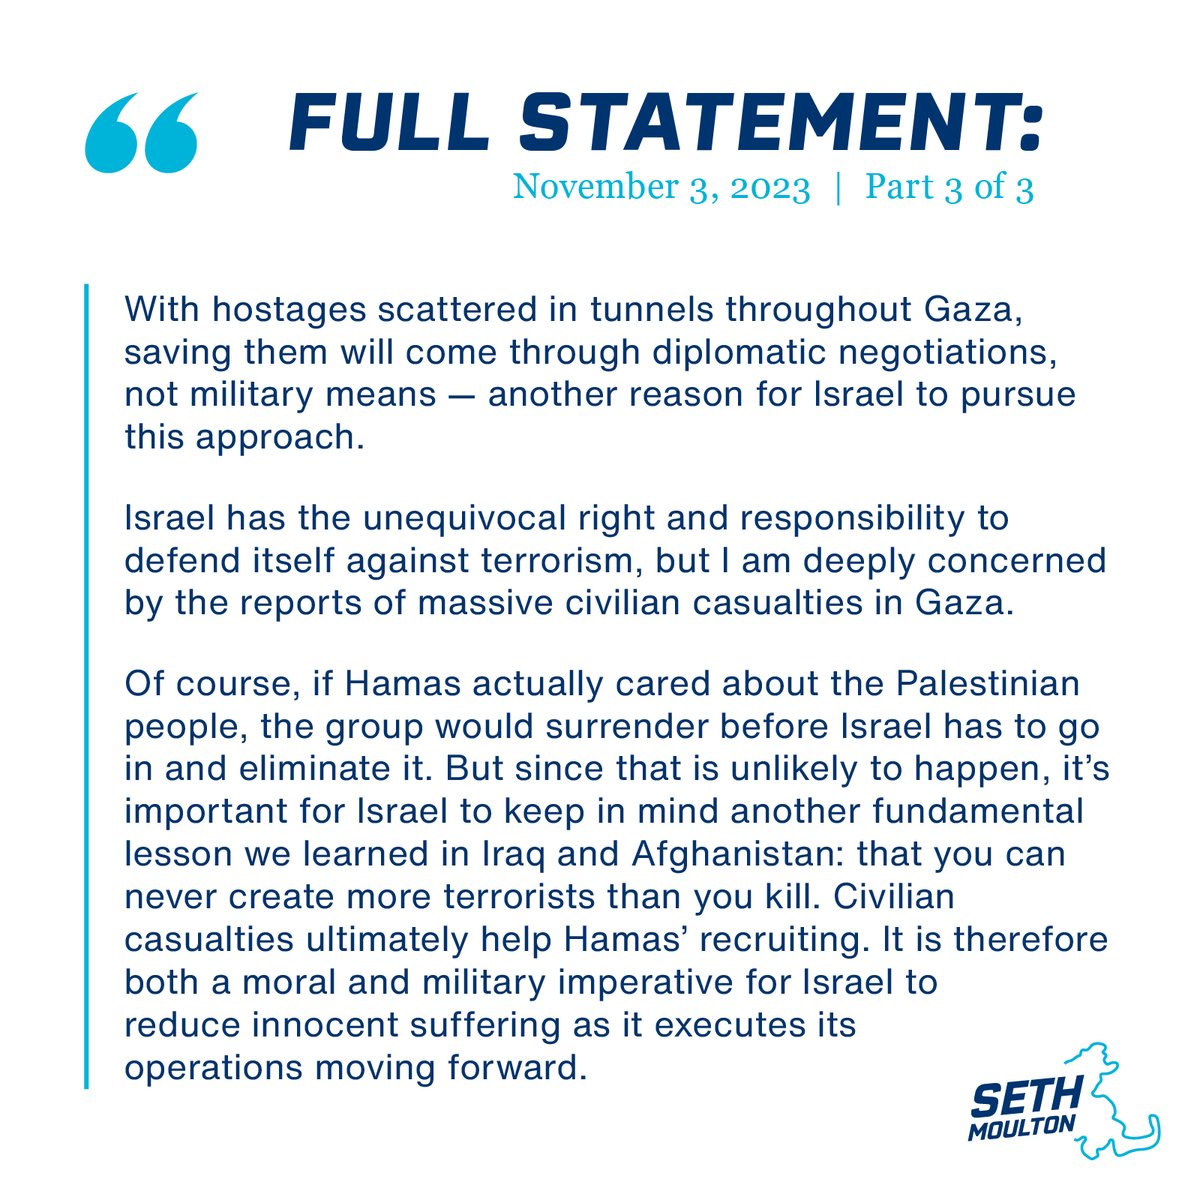 I support Israel's right to defend itself against Hamas terrorists, but I am also very concerned about the large numbers of civilian deaths in Gaza. Israel must prioritize civilian evacuation & surge humanitarian aid into Gaza. New full statement: